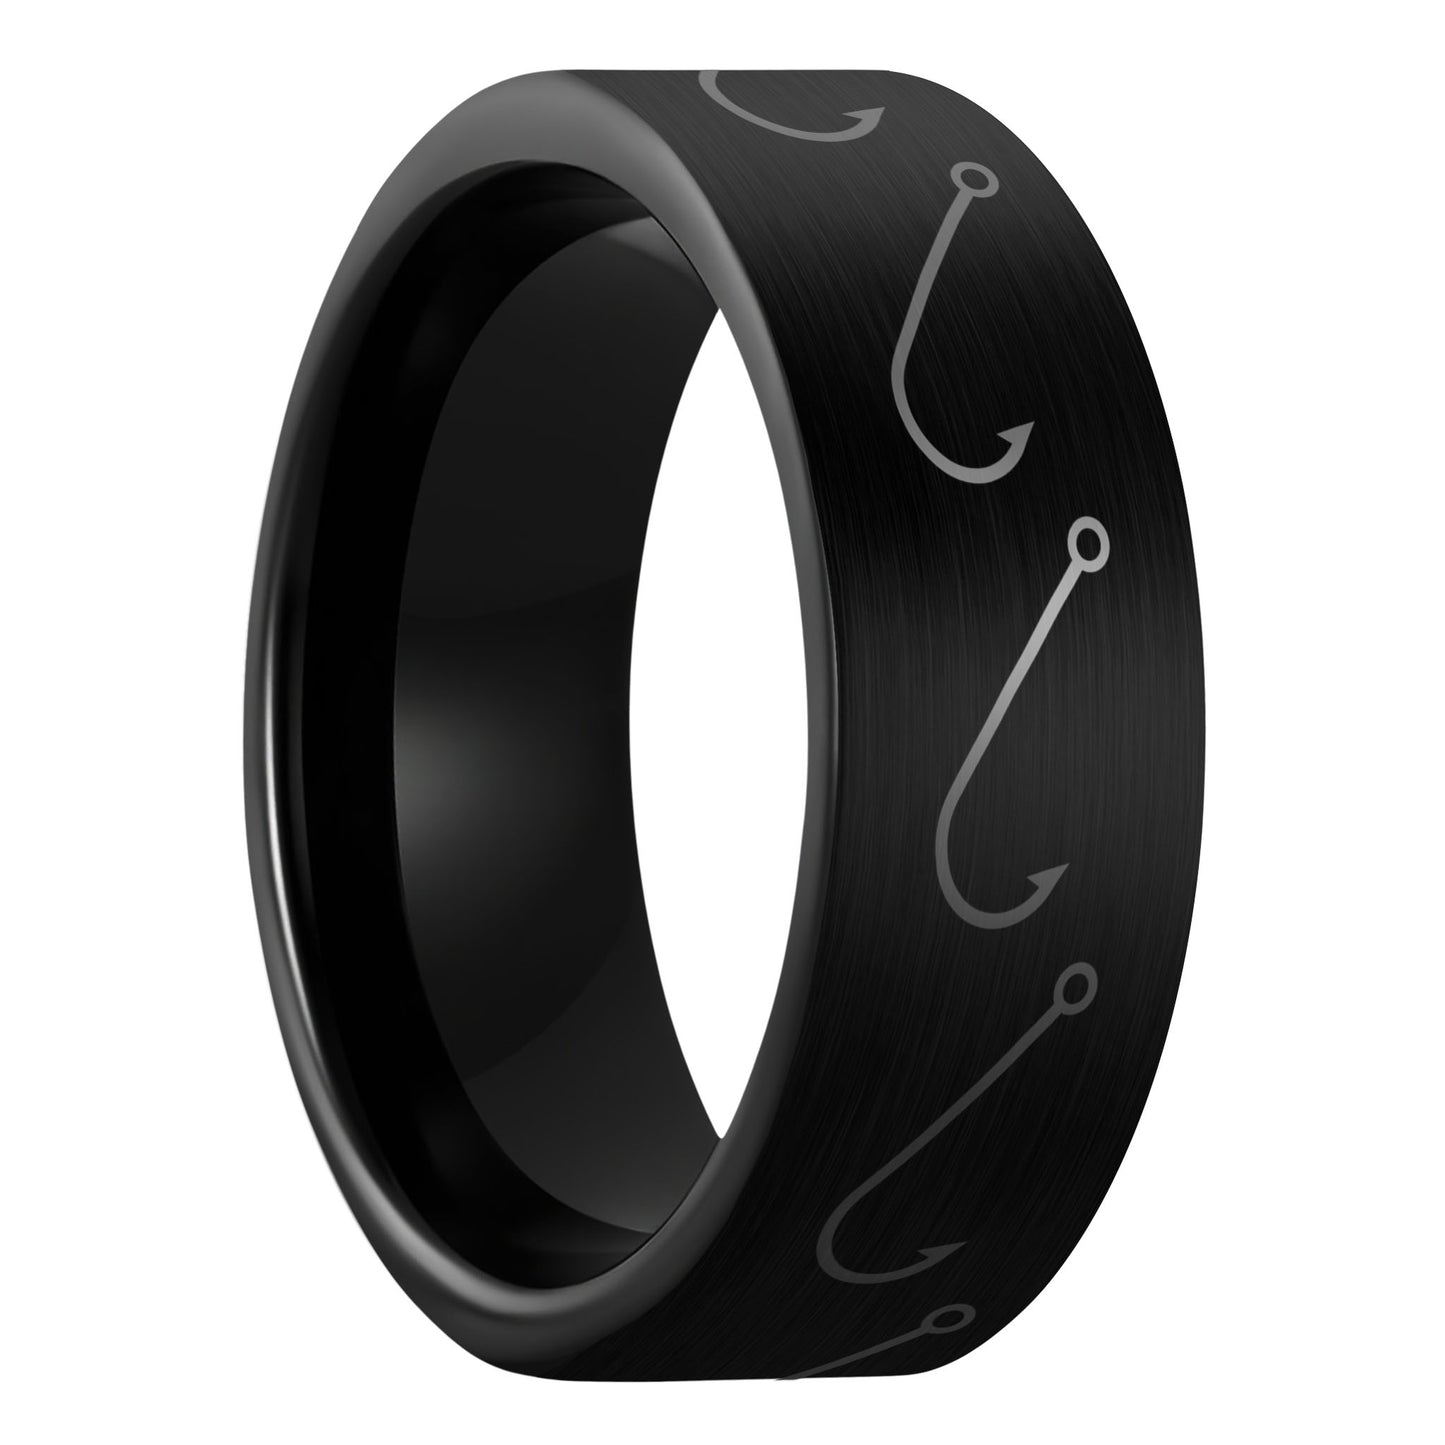 A simple fishing hook brushed black tungsten men's wedding band displayed on a plain white background.